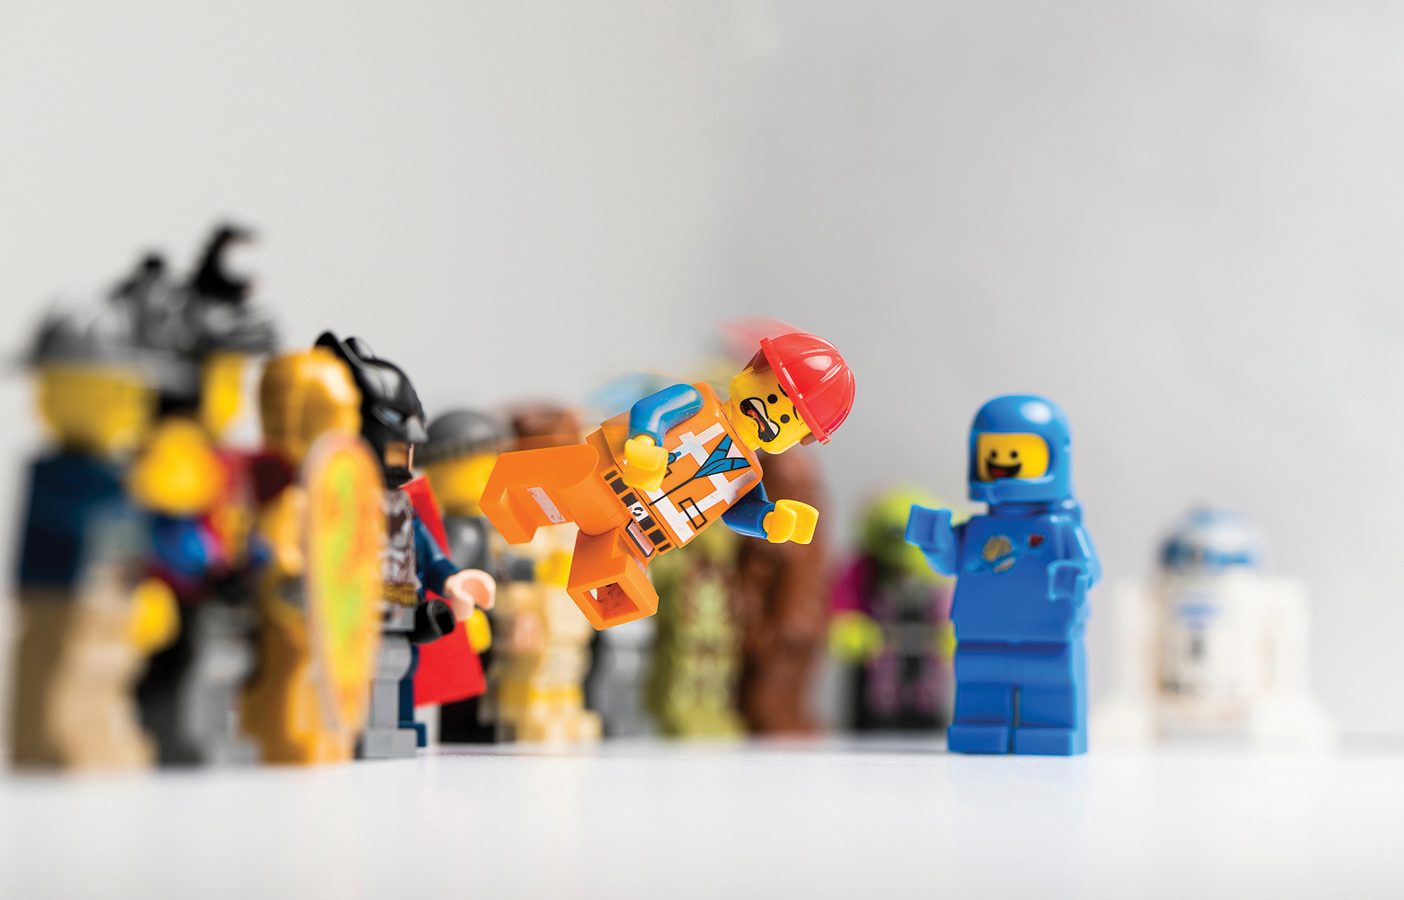 Lego figures stand at attention and watch as one figure flies through the air with a surprised look on its face.